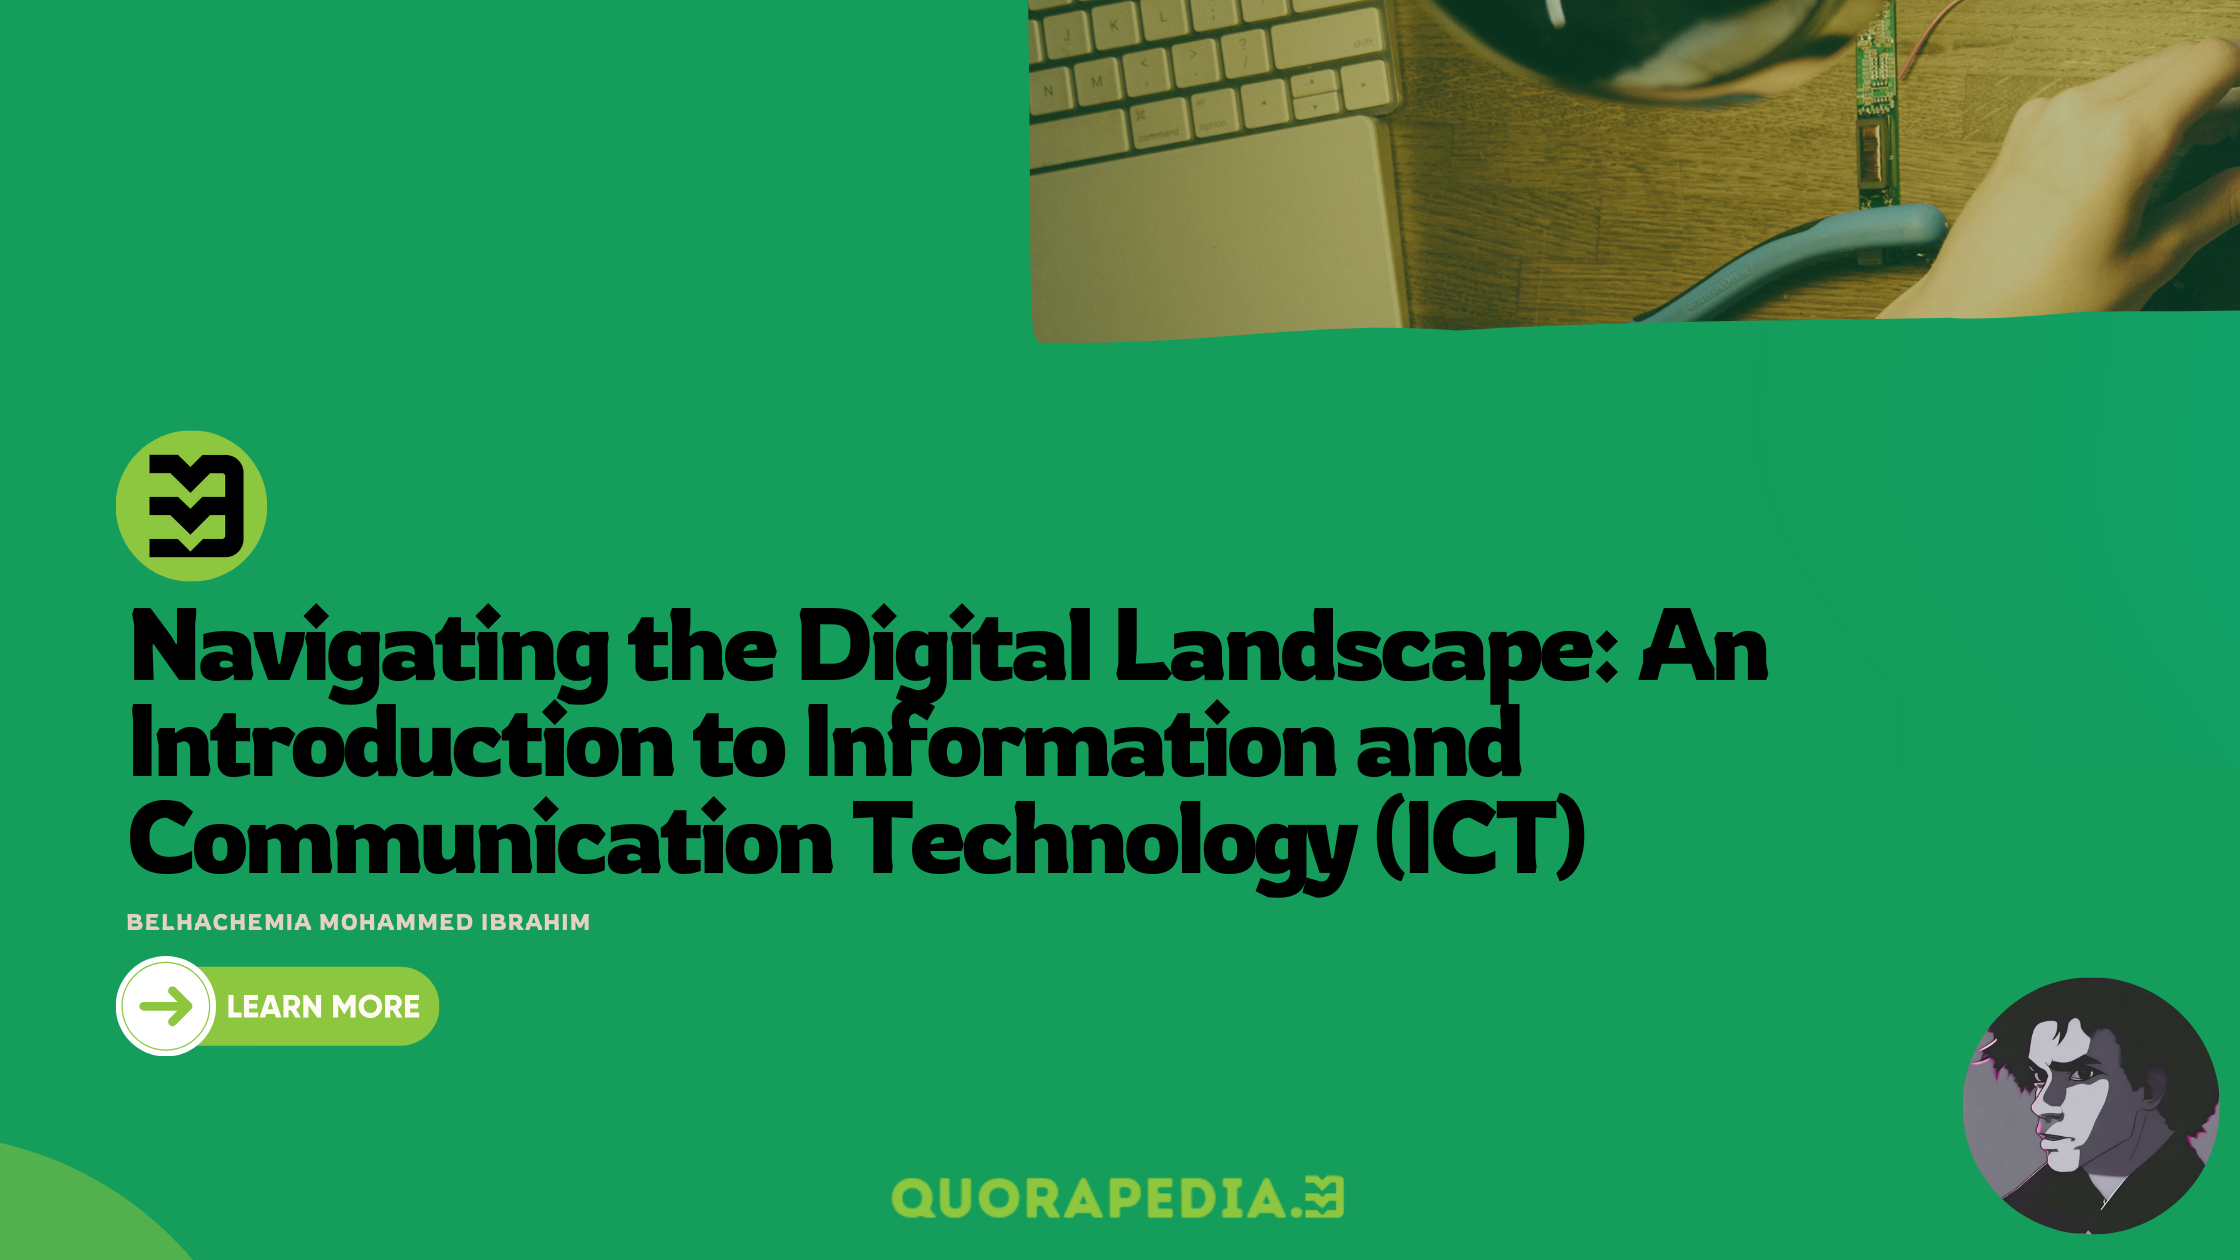 Navigating the Digital Landscape: An Introduction to Information and Communication Technology (ICT)